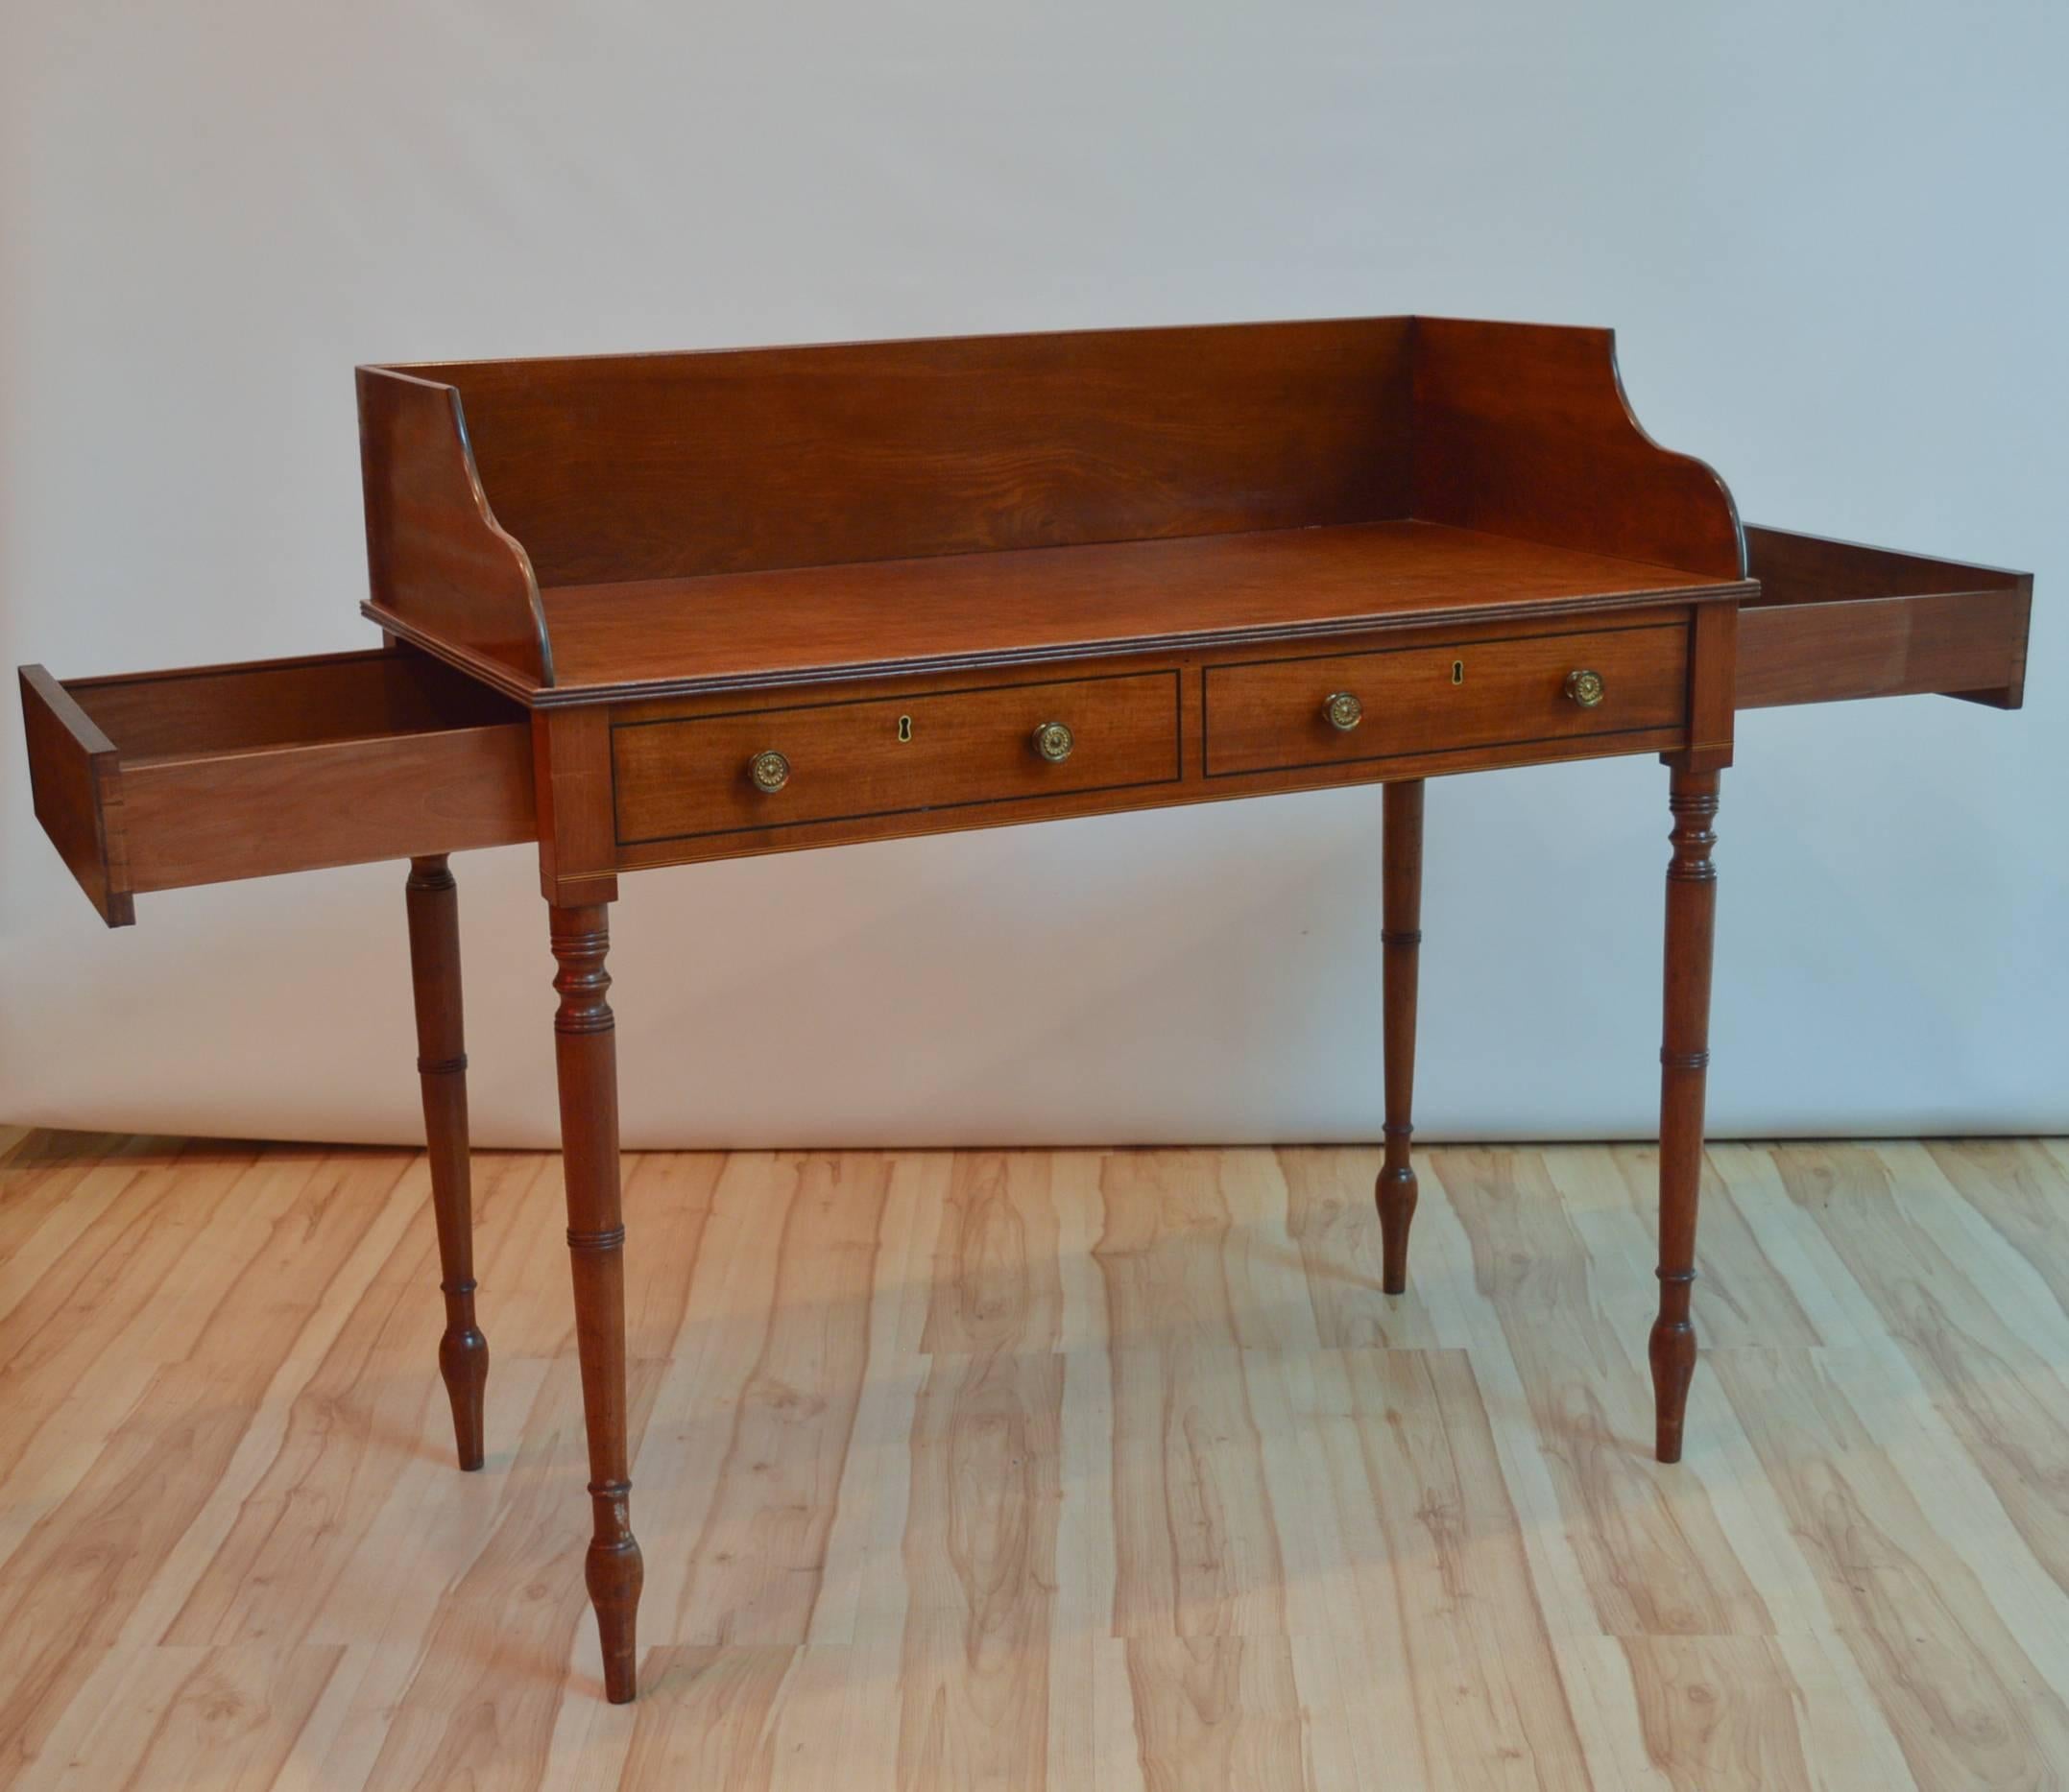 Cuban mahogany American writing desk, most likely manufactured in Massachusetts in the early to mid-1800s. The desk features a false front and 